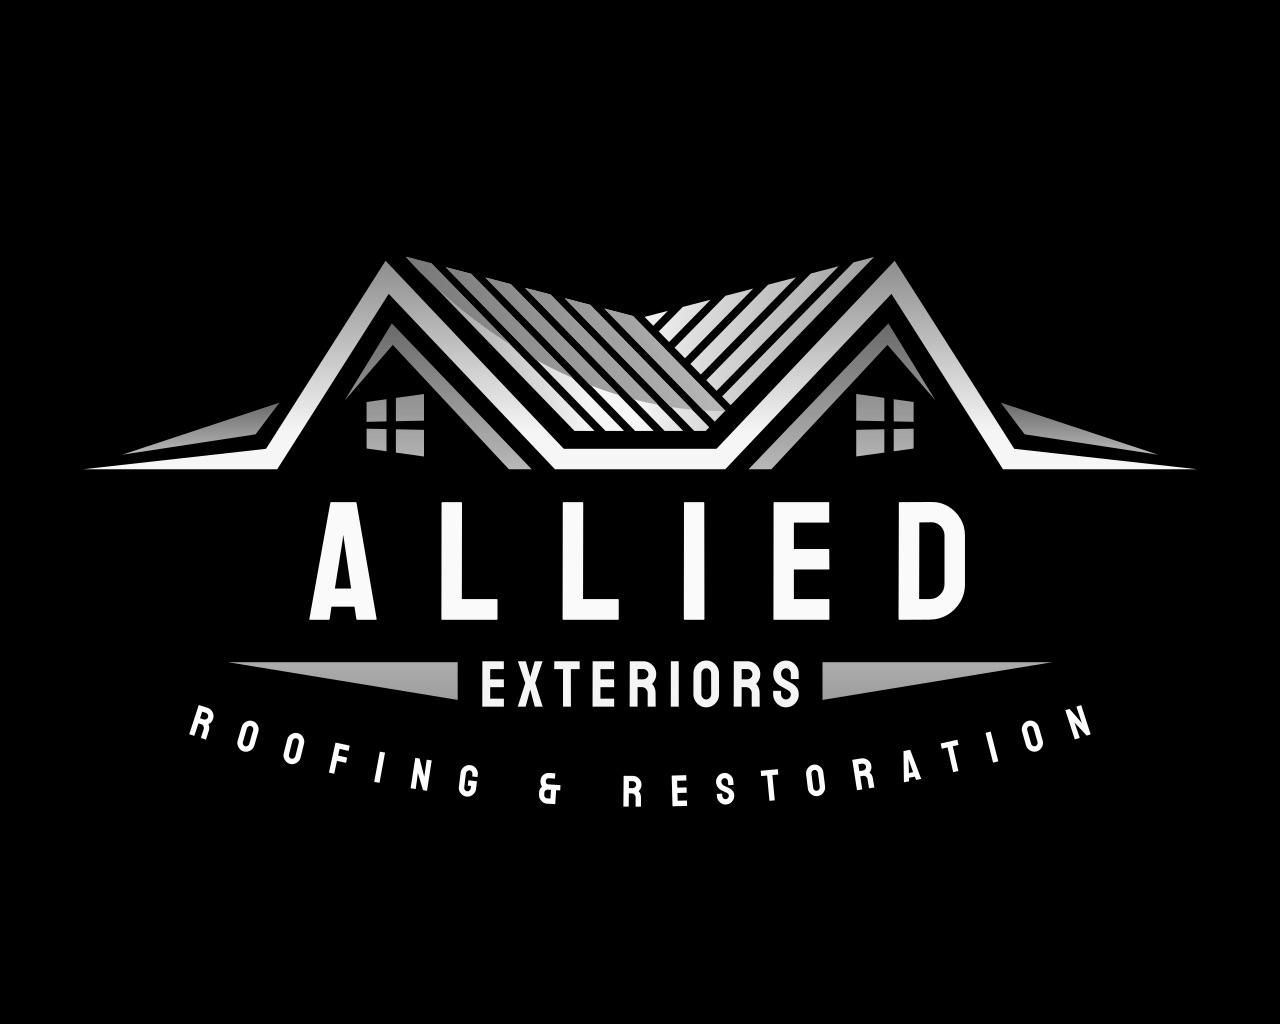  for Allied Exteriors in Buford, GA